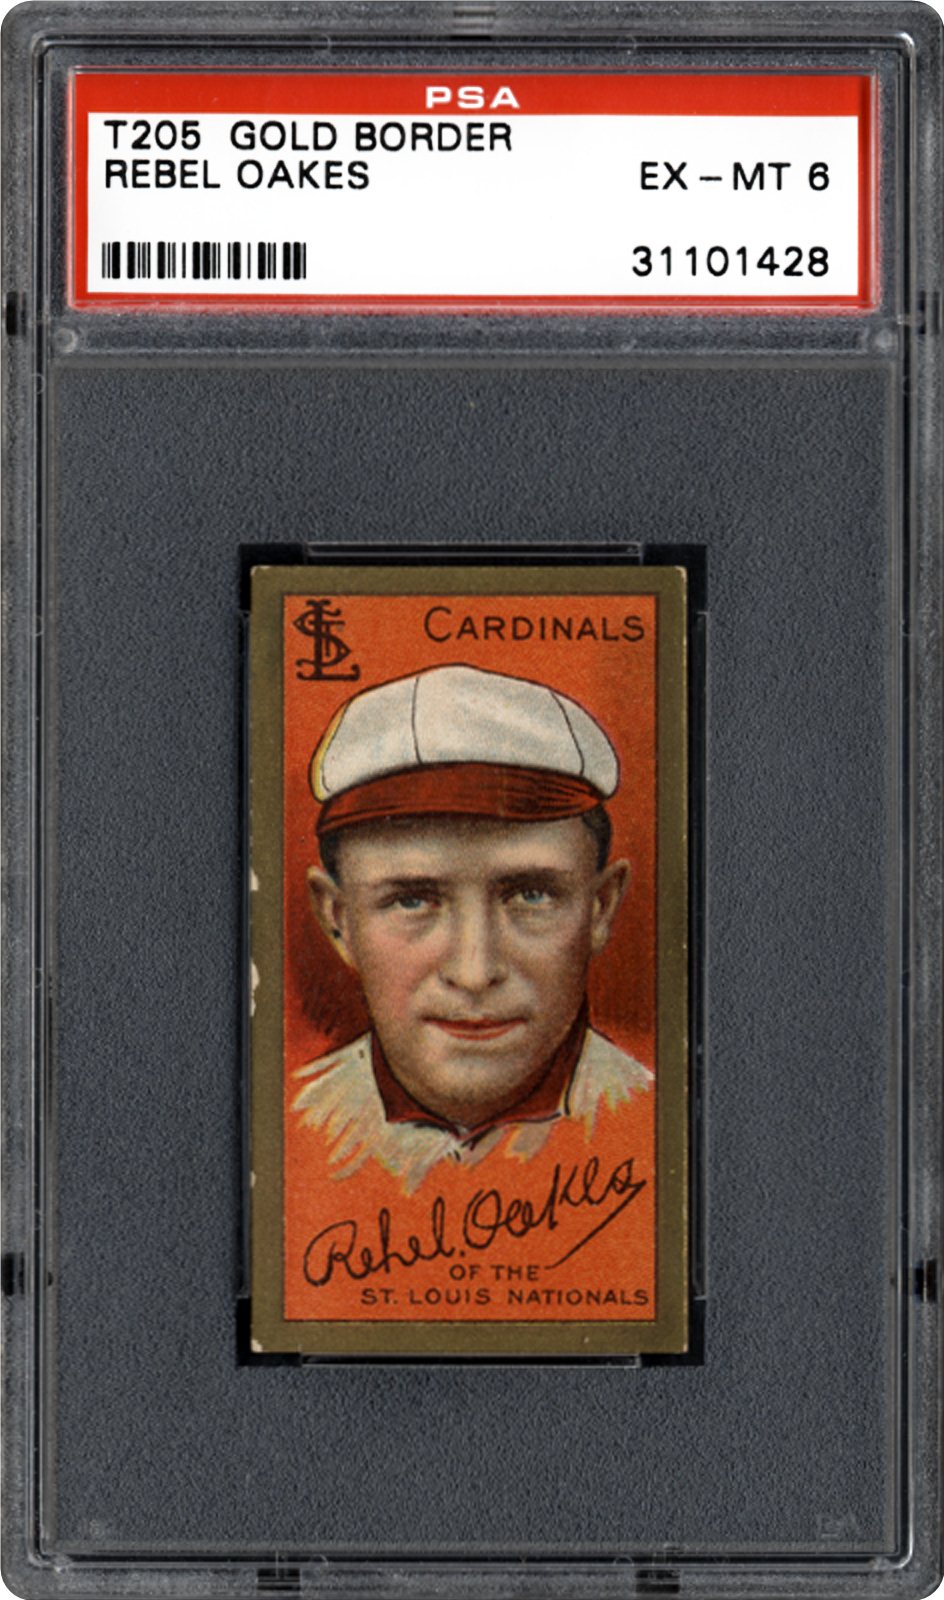 1911 Gold Border (T205) Rebel Oakes | PSA CardFacts™